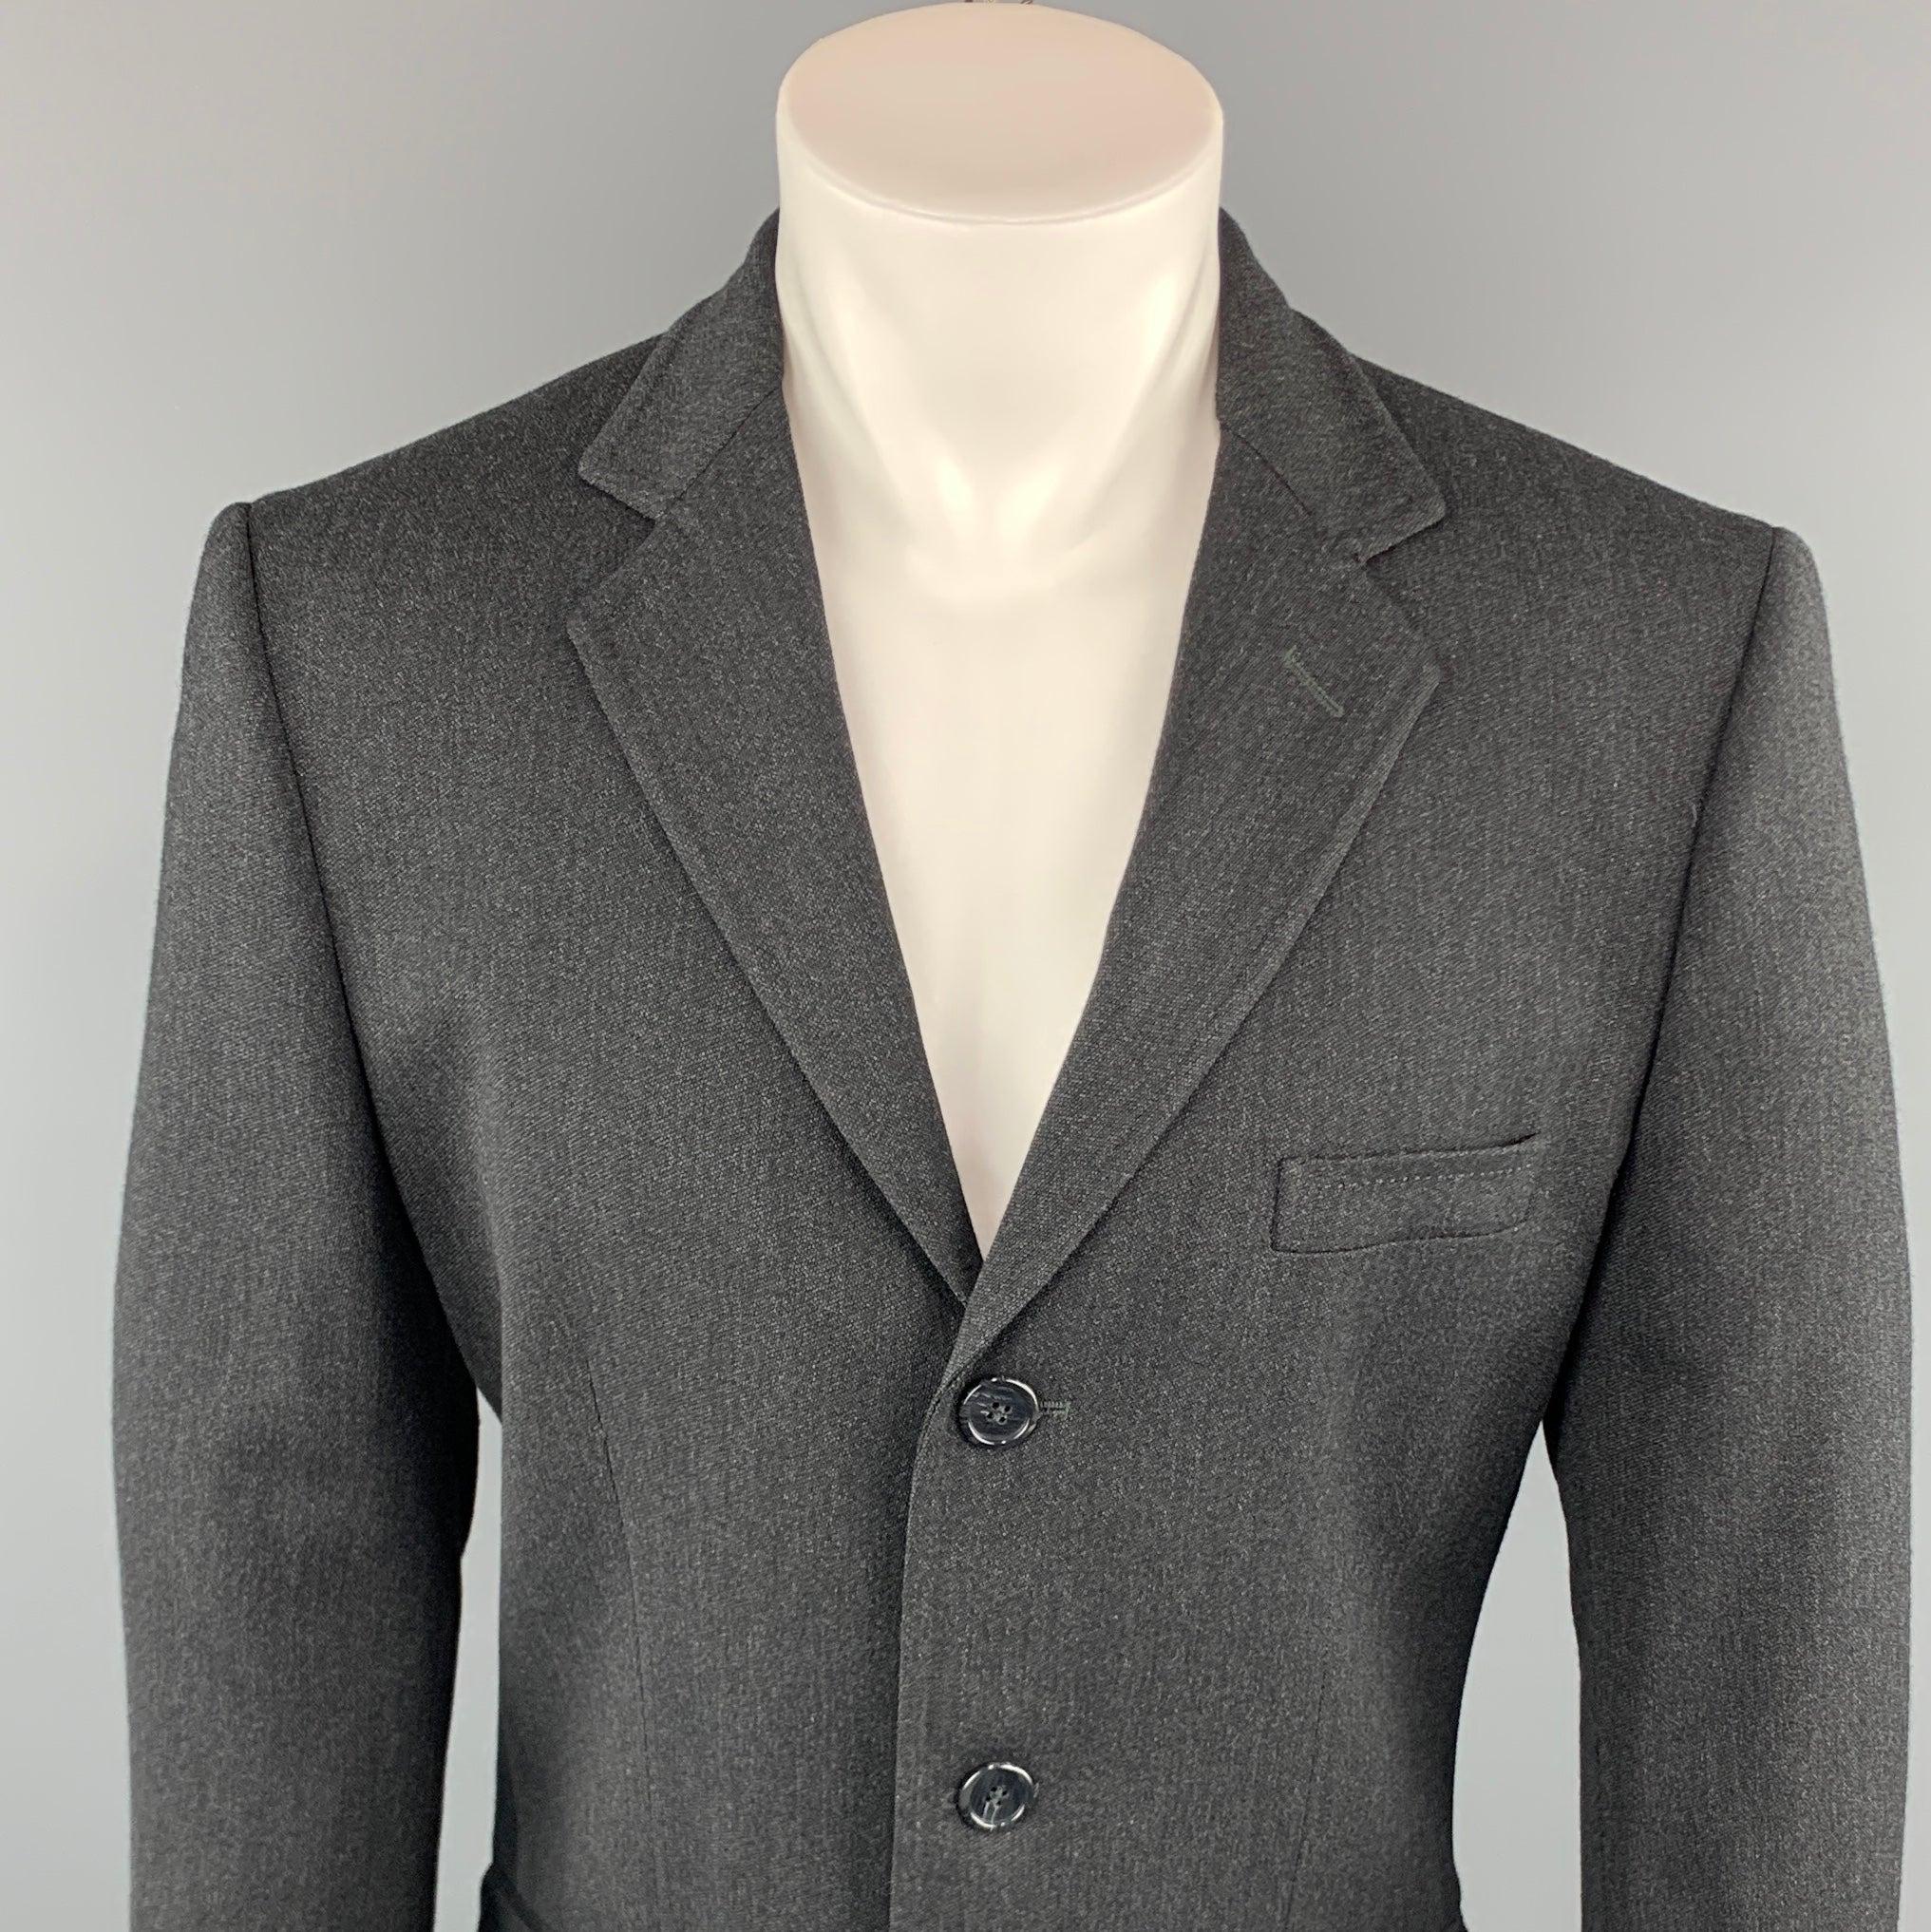 DOLCE & GABBANA sport coat comes in a charcoal wool blend featuring a notch lapel, flap pockets, and a three button closure. Made in Italy.
Excellent
Pre-Owned Condition. 

Marked:   IT 50 

Measurements: 
 
Shoulder: 18 inches 
Chest: 40 inches